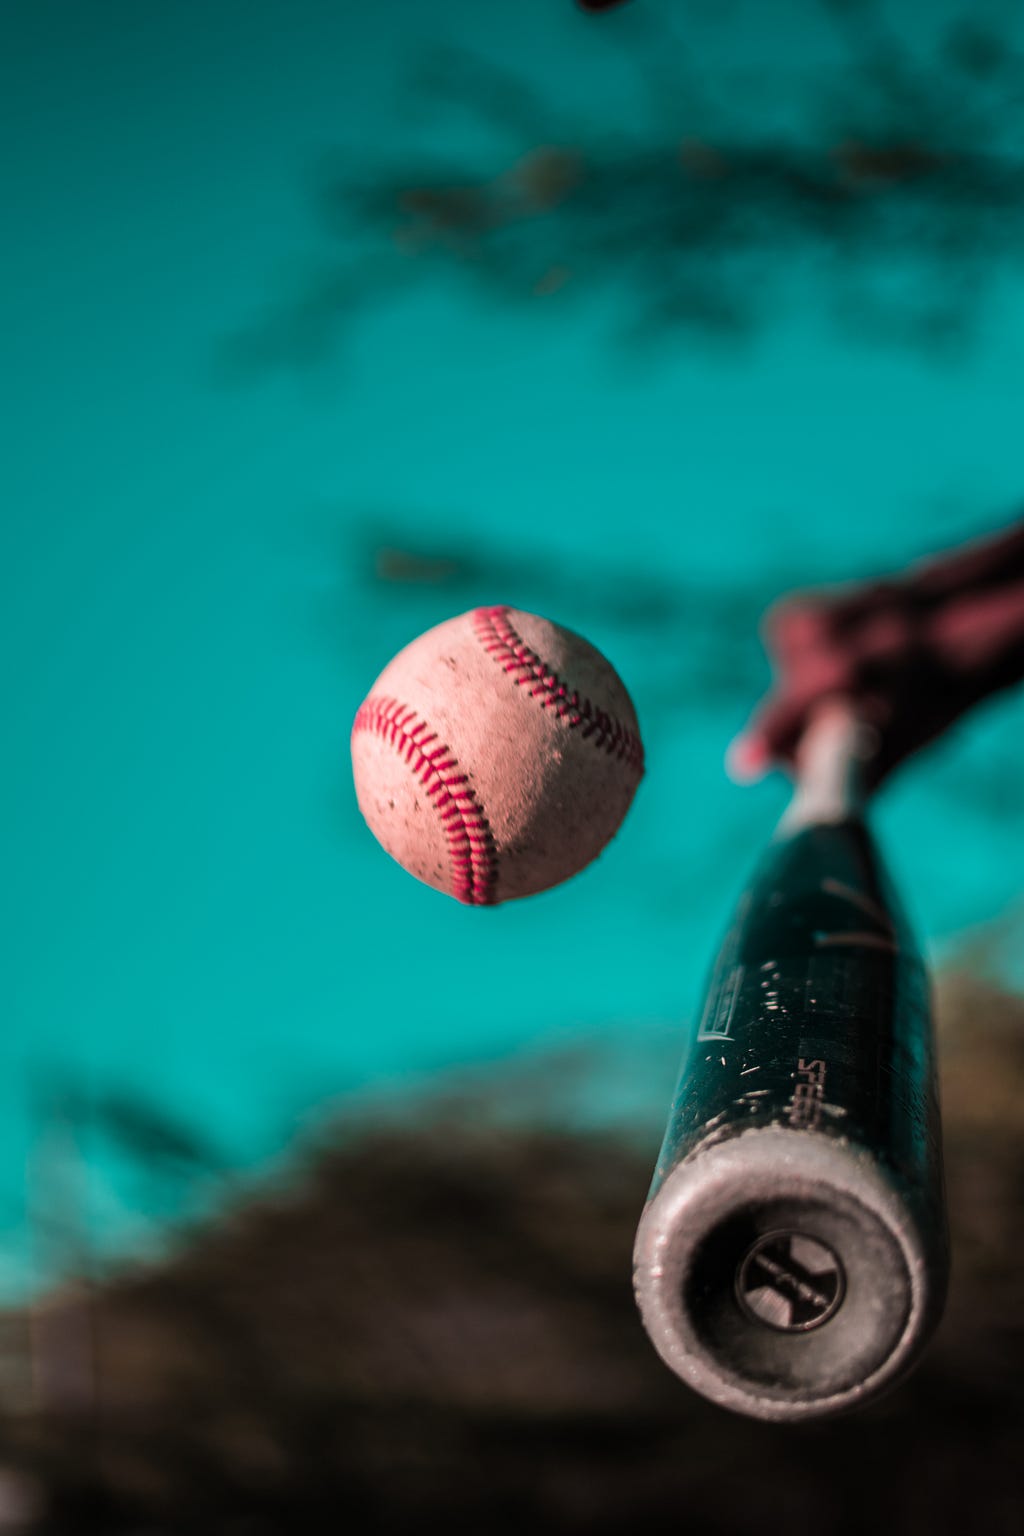 White baseball with red threading floats in front of black baseball bat on blue background.